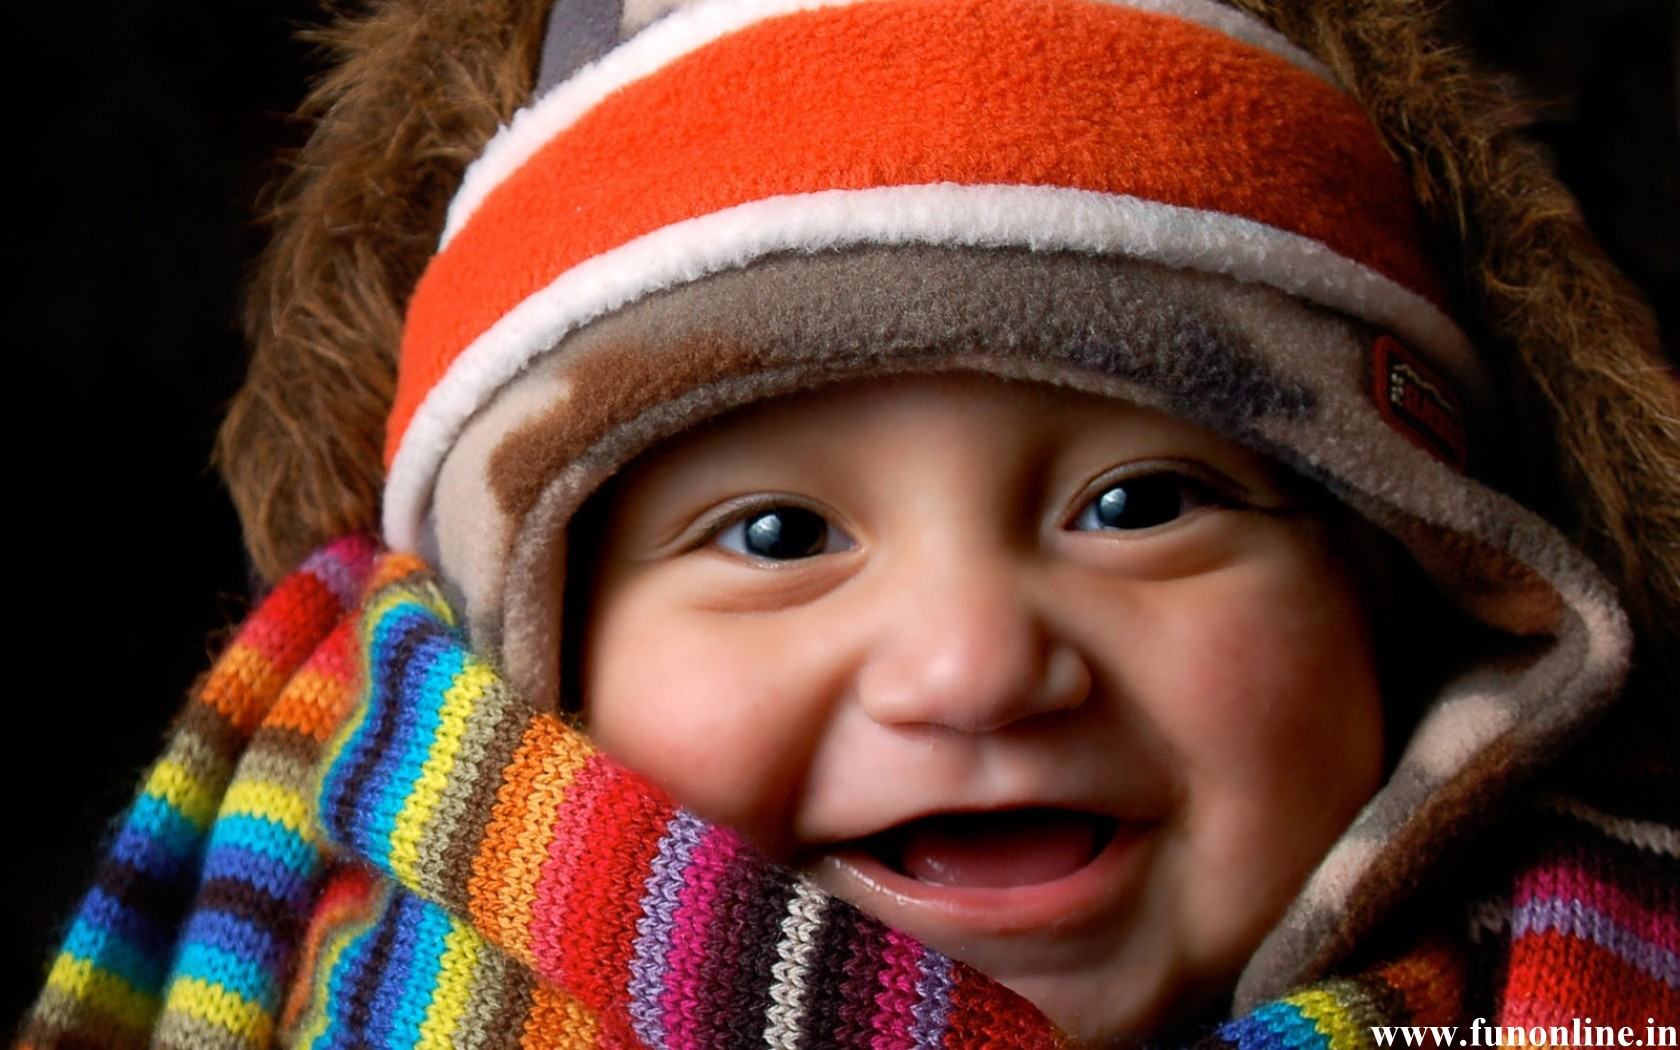 Cute Baby Smiling HD Wallpapers | Cute Baby Wallpapers